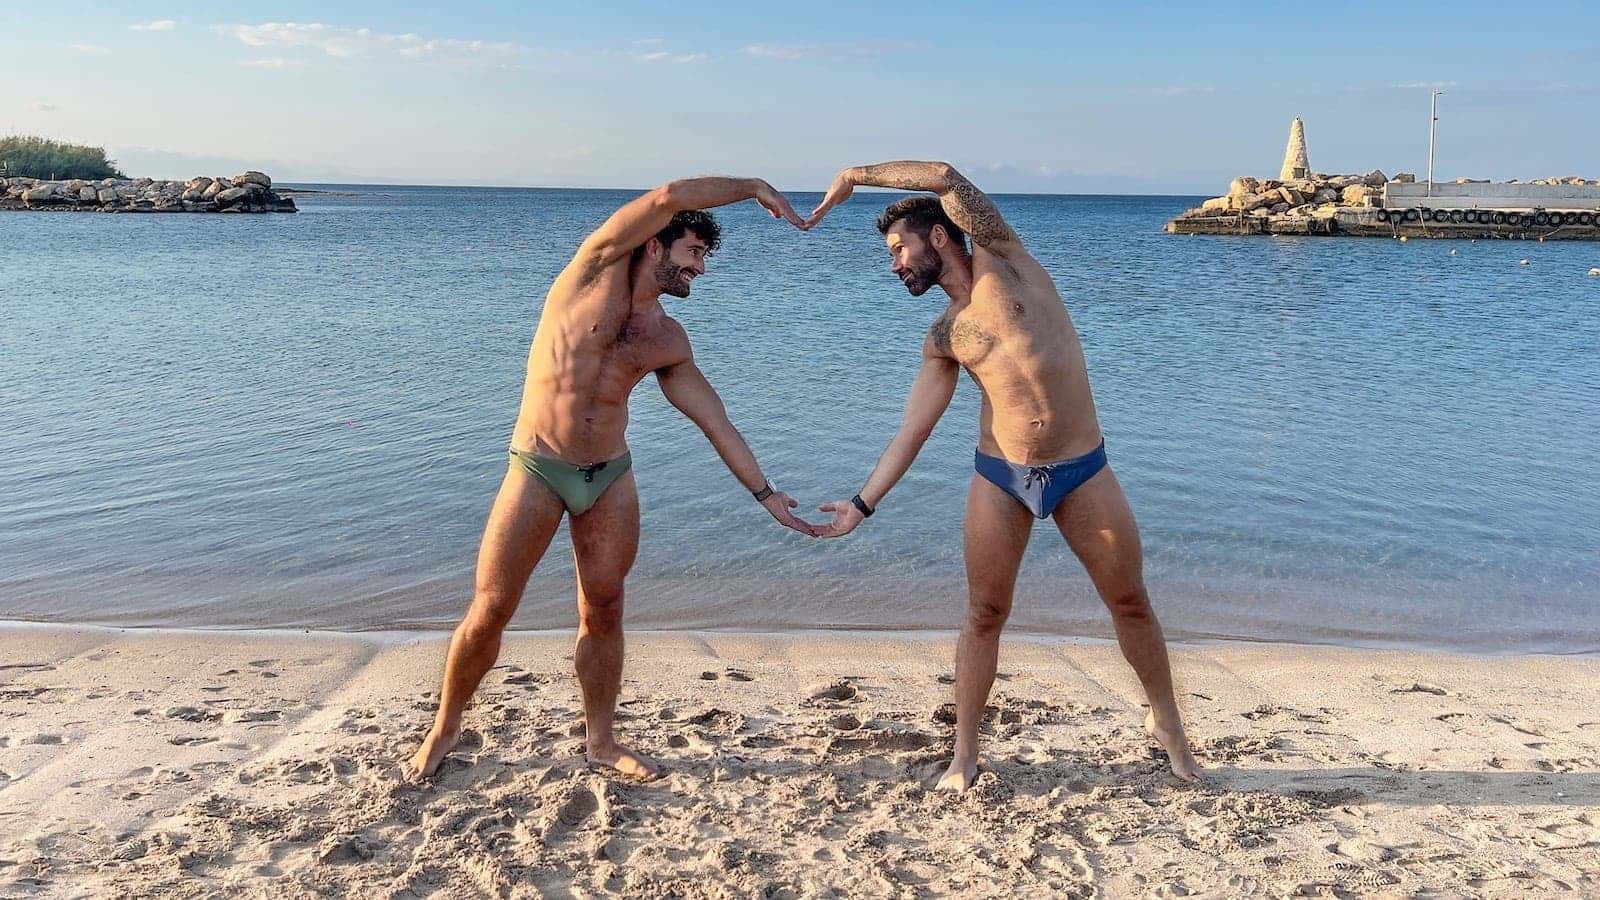 Stefan and Seby creating a giant heart on the beach in Cyprus.